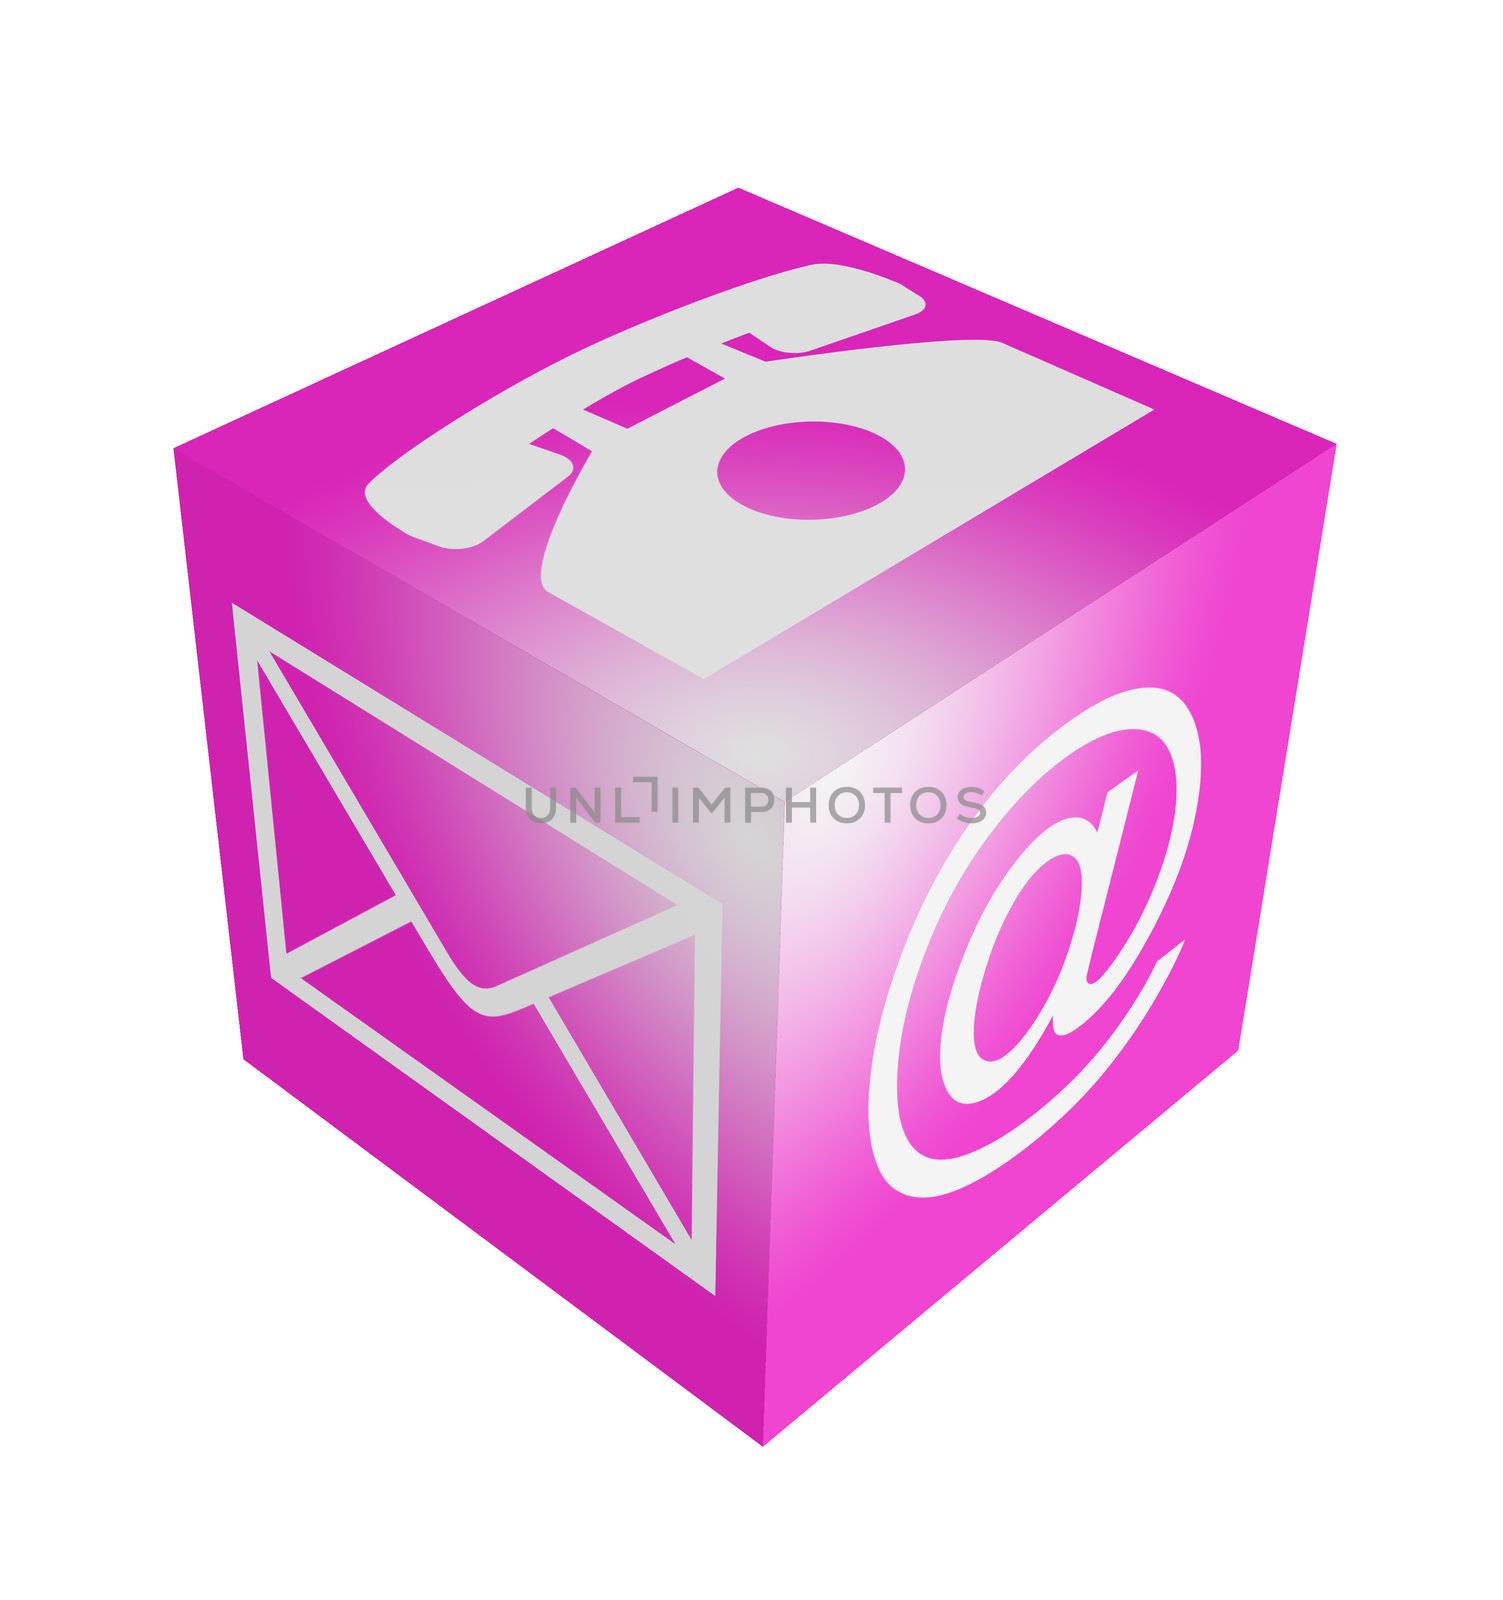 3d Contact cube icon isolated on white background